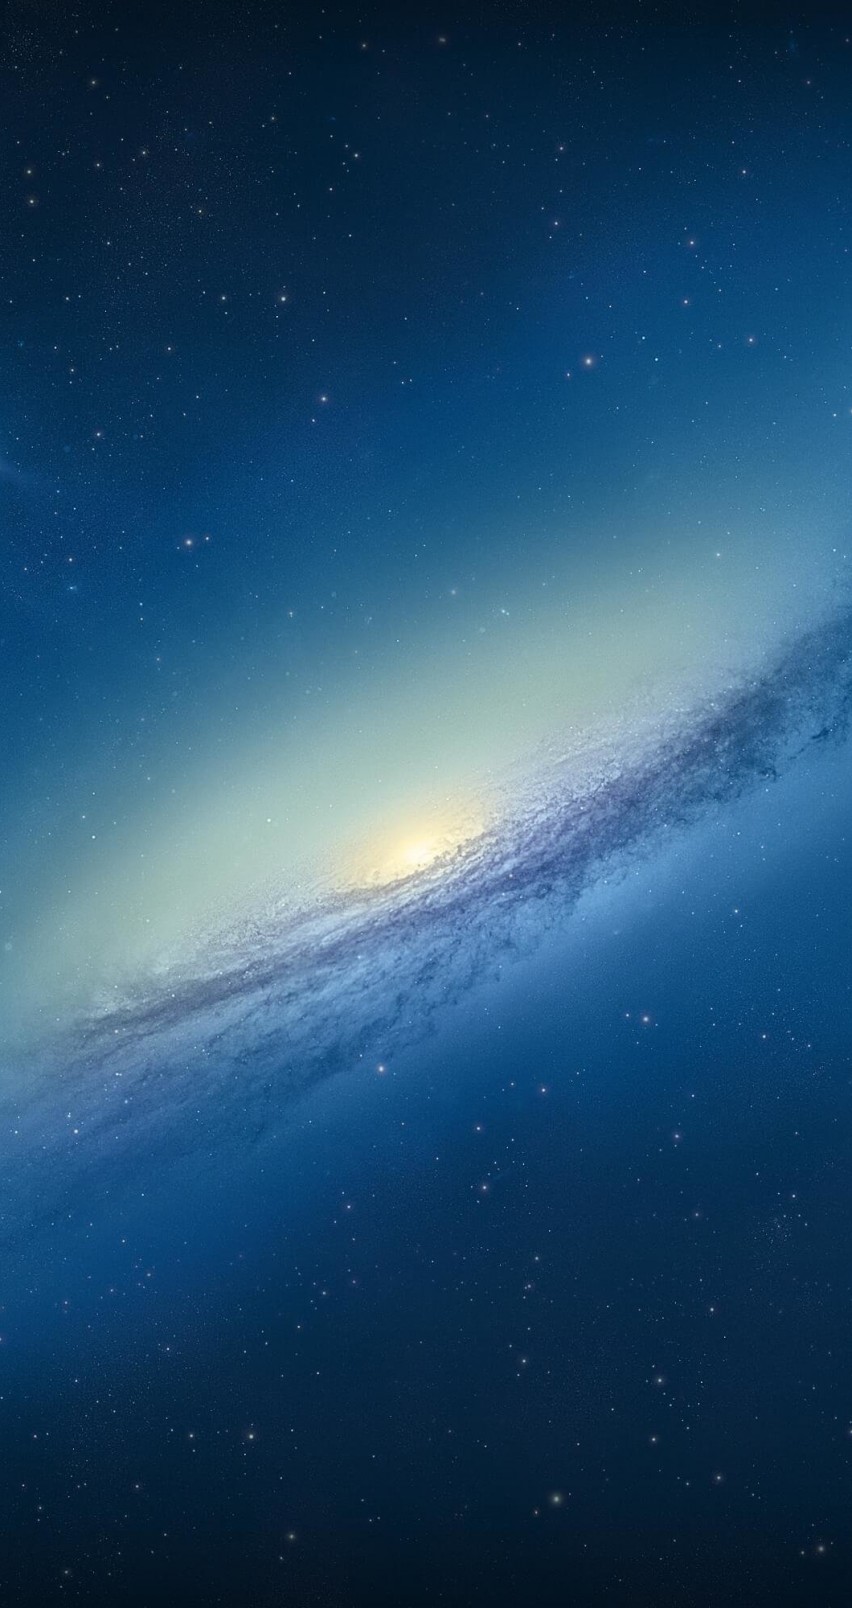 Galaxy NGC 3190 Wallpaper for Apple iPhone 6 / 6s